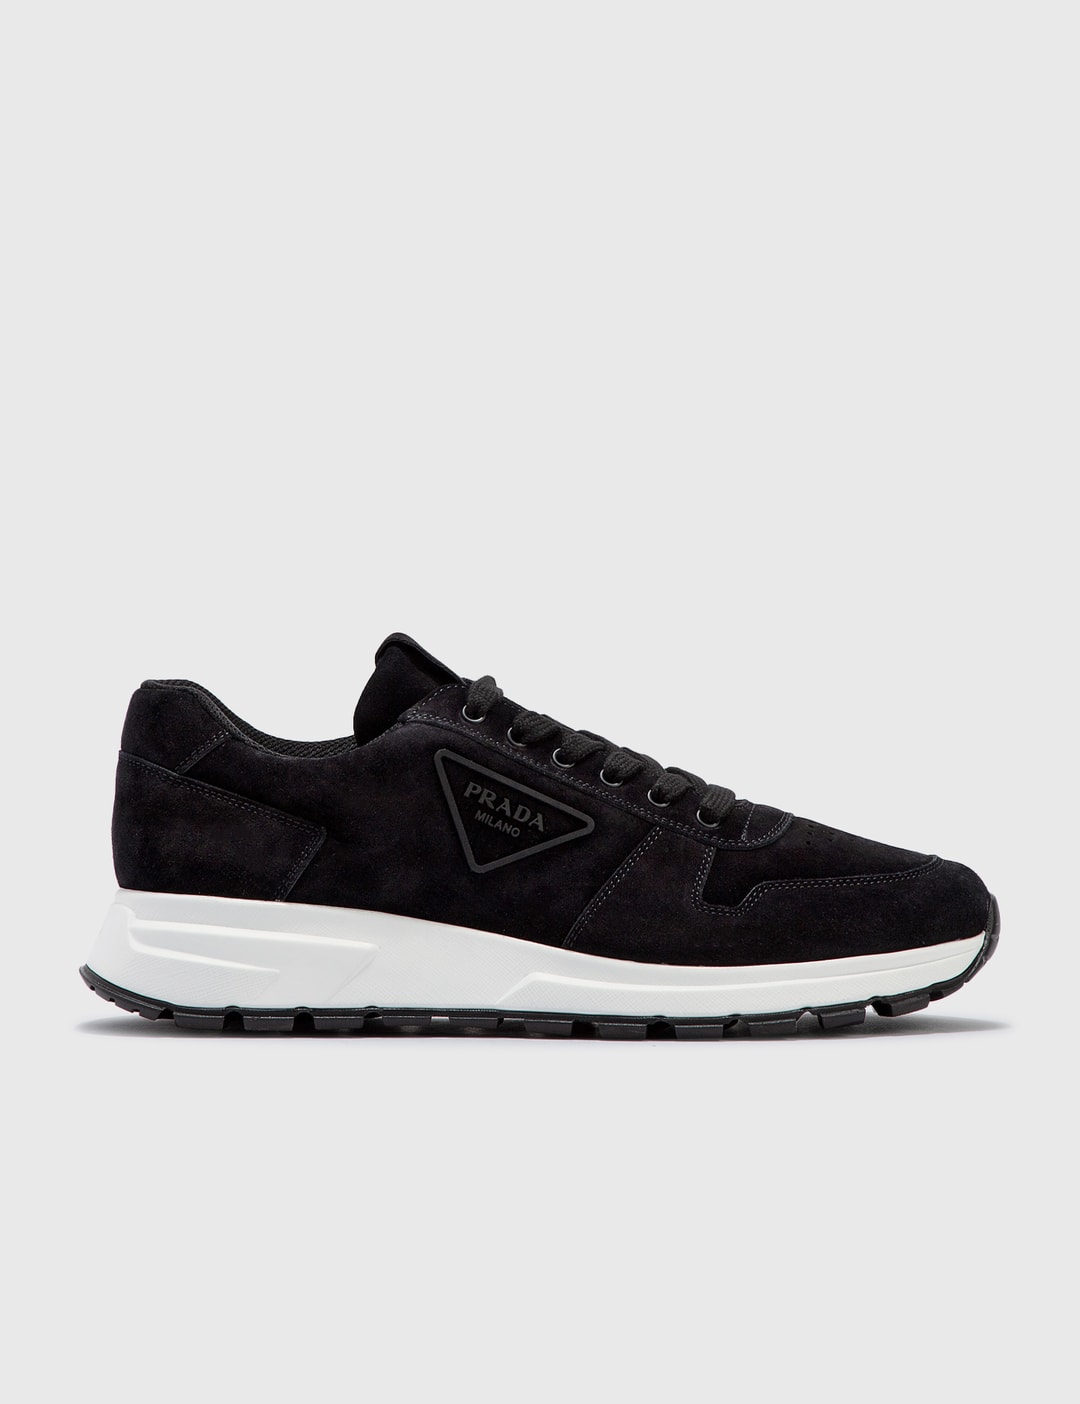 Prada - Runner | HBX - Globally Curated Fashion and Lifestyle by Hypebeast